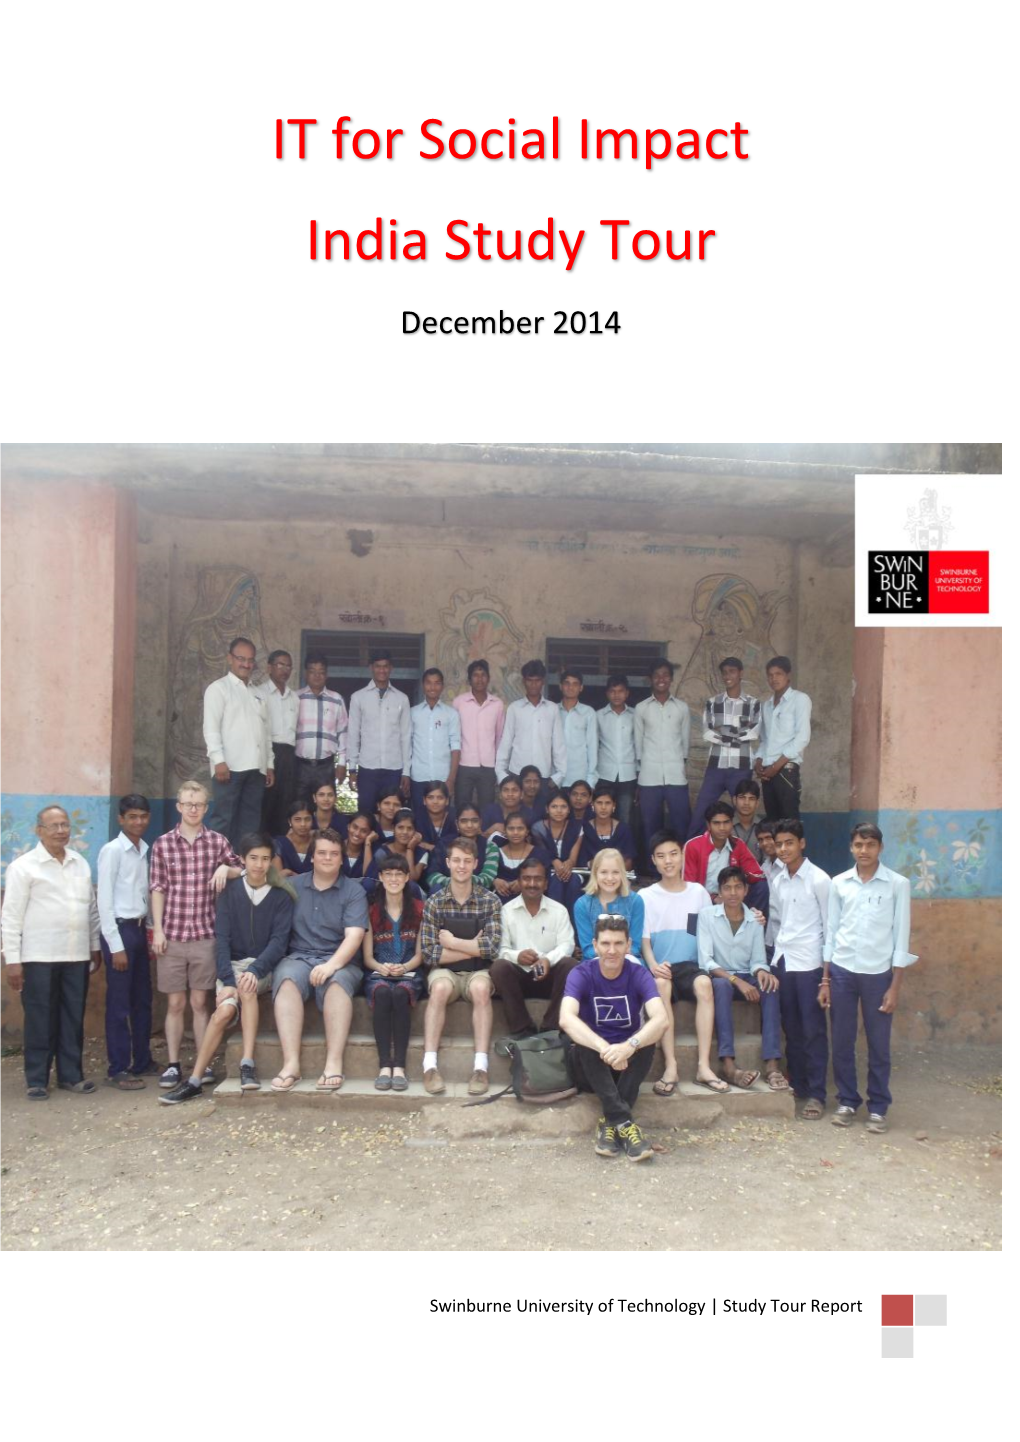 IT for Social Impact India Study Tour December 2014